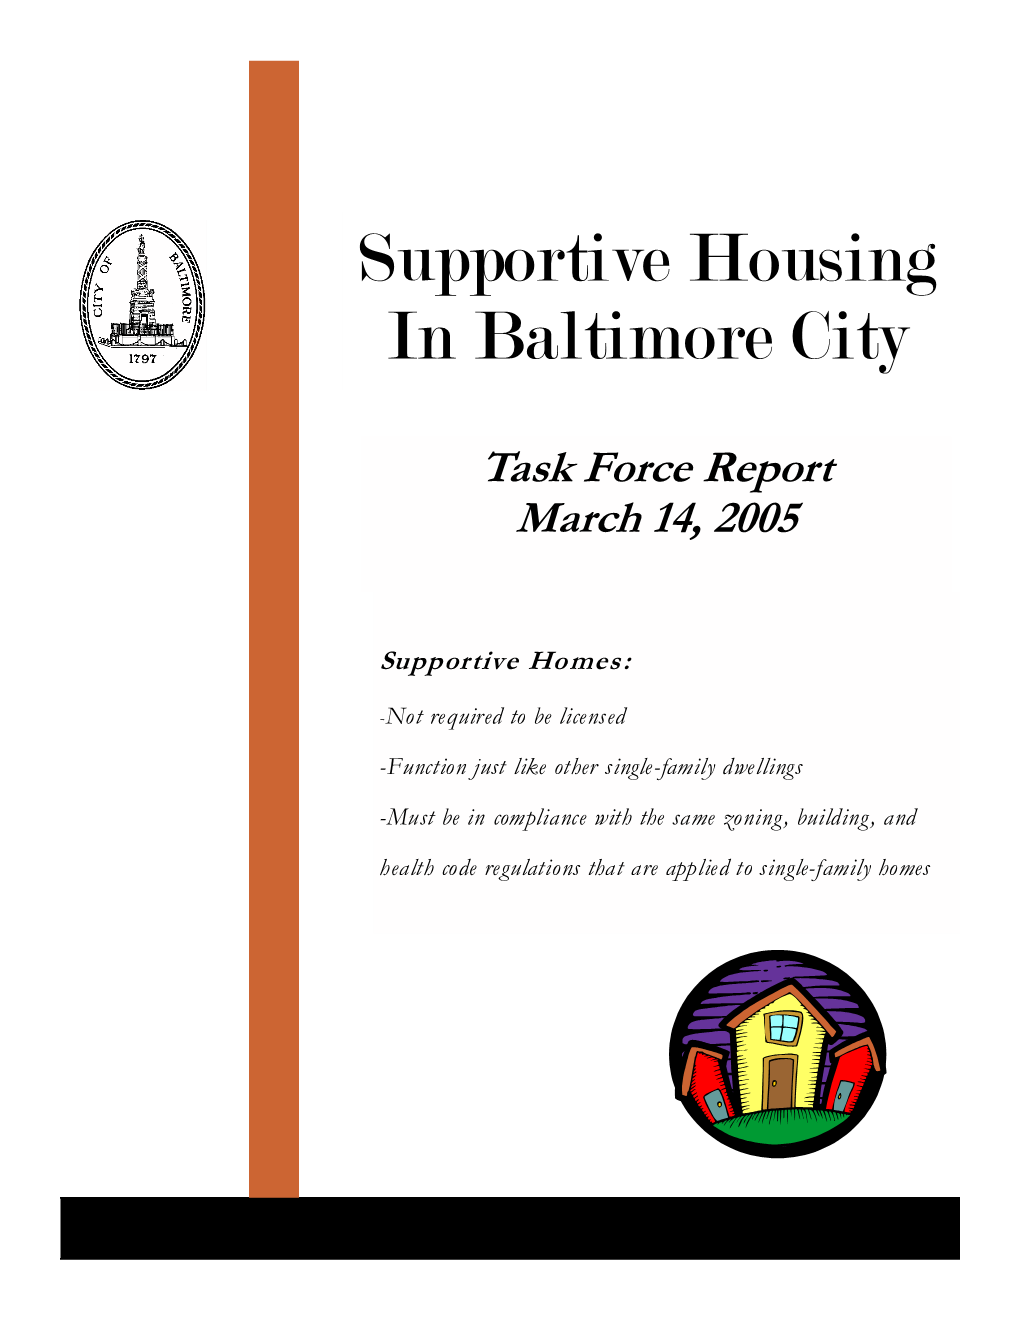 The Supportive Home Task Force